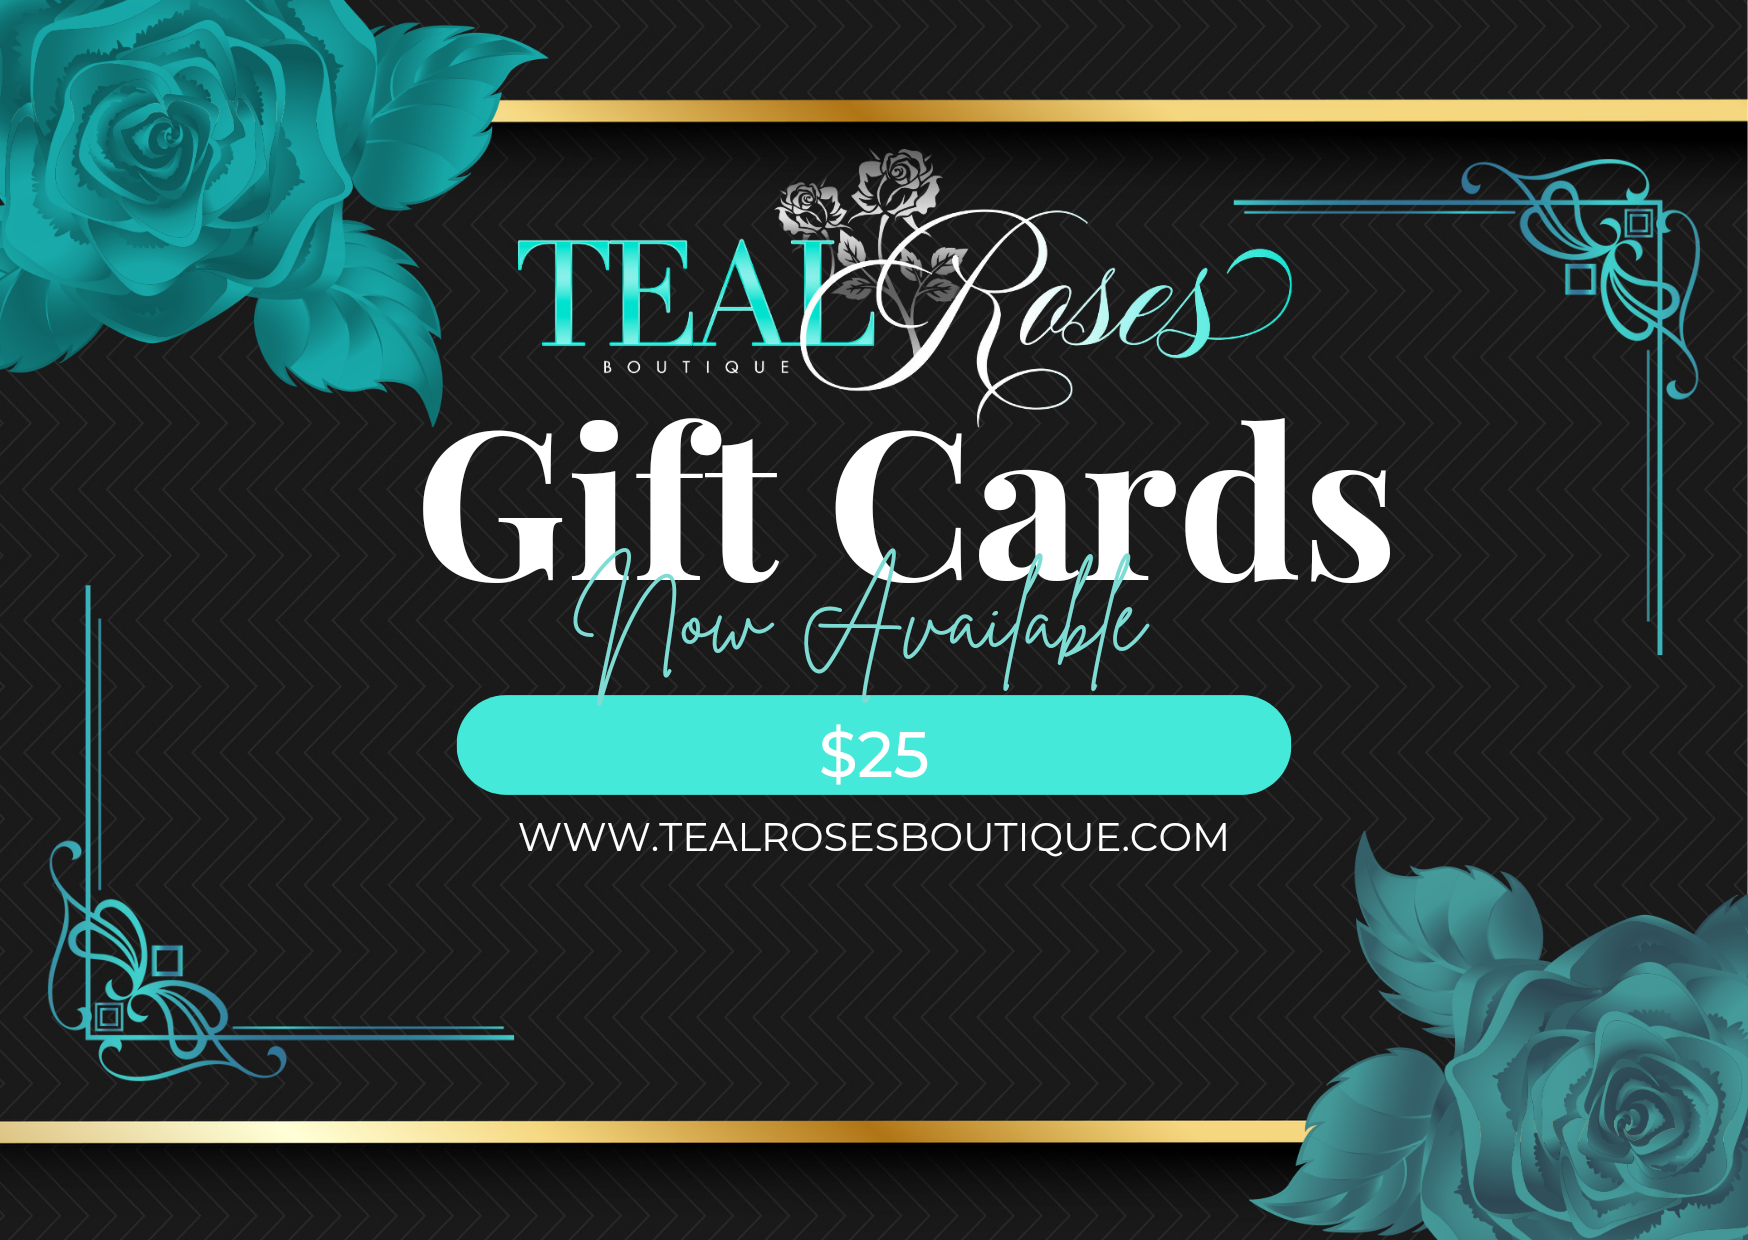 Teal Roses Boutique Gift Cards